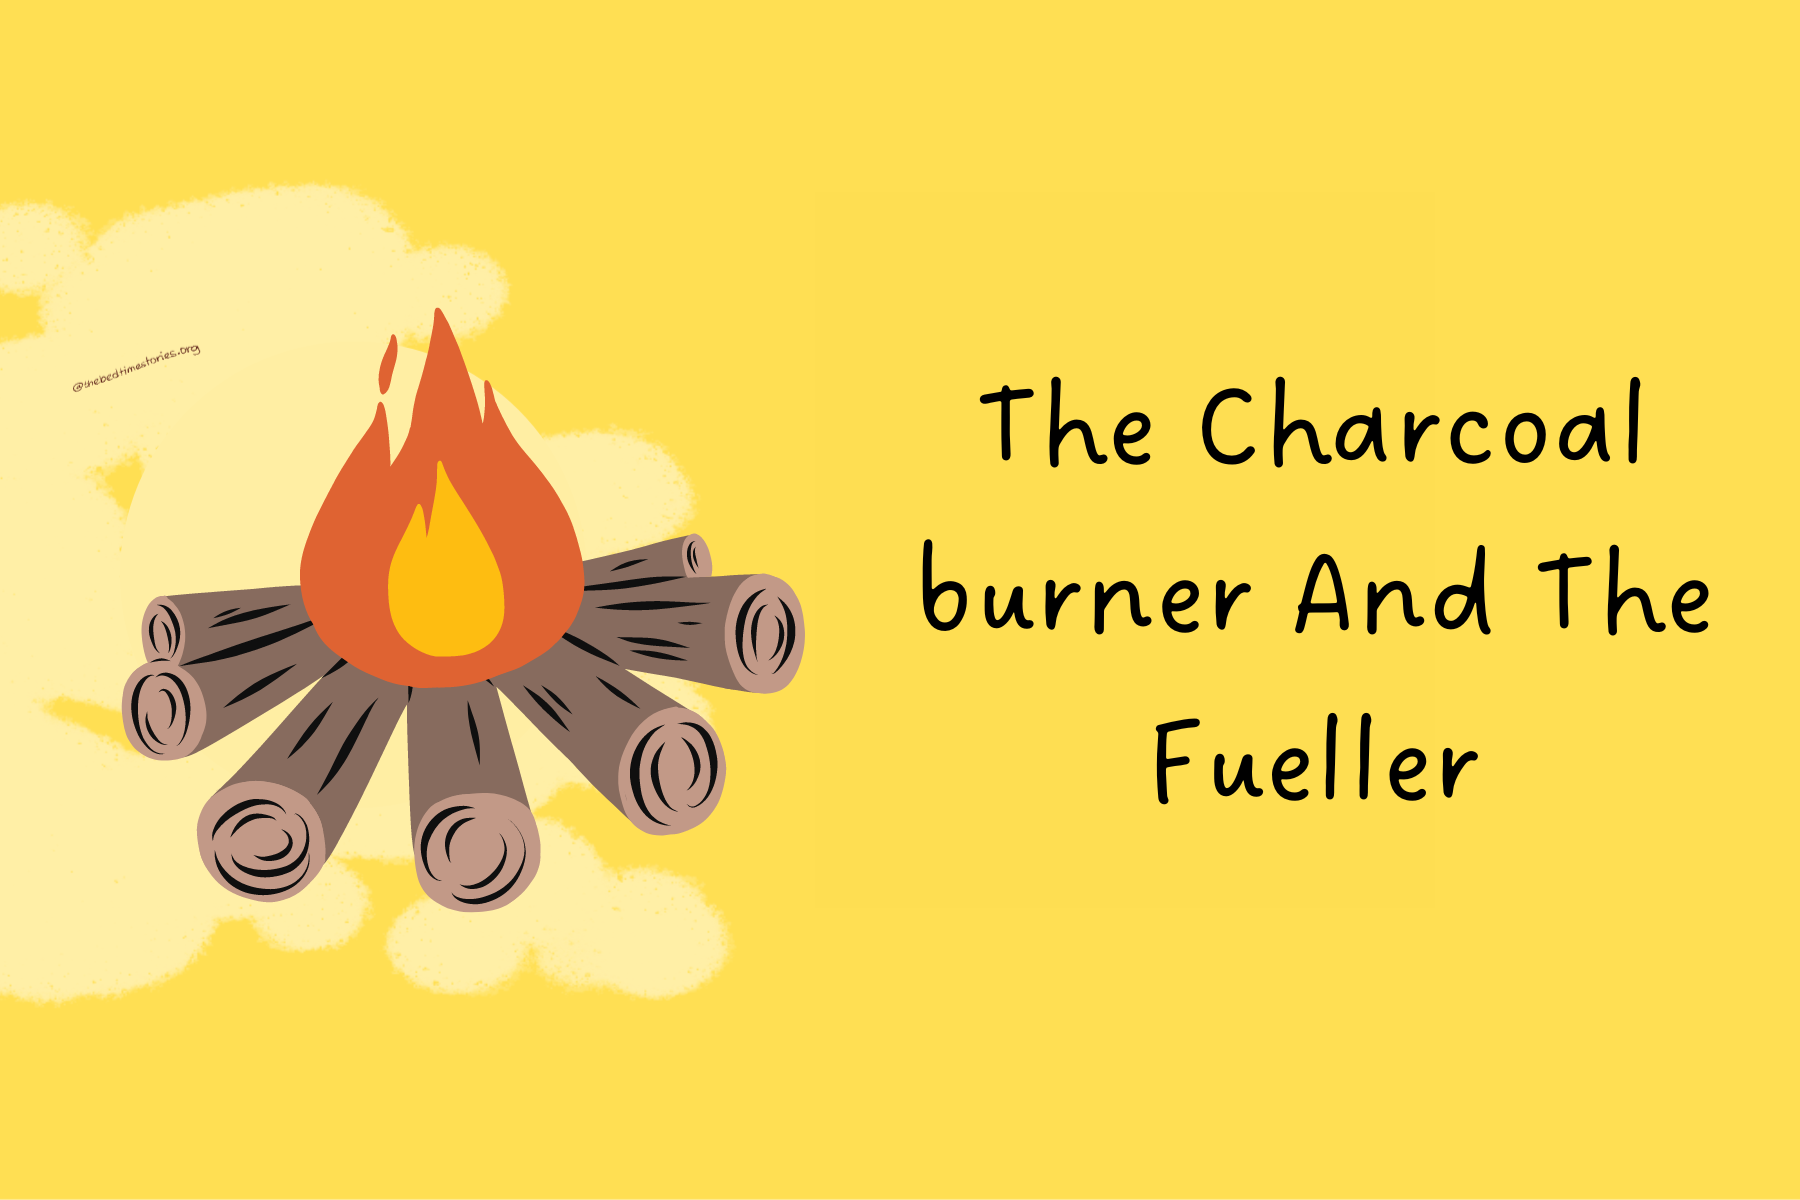 The Charcoal-Burner And The Fueller